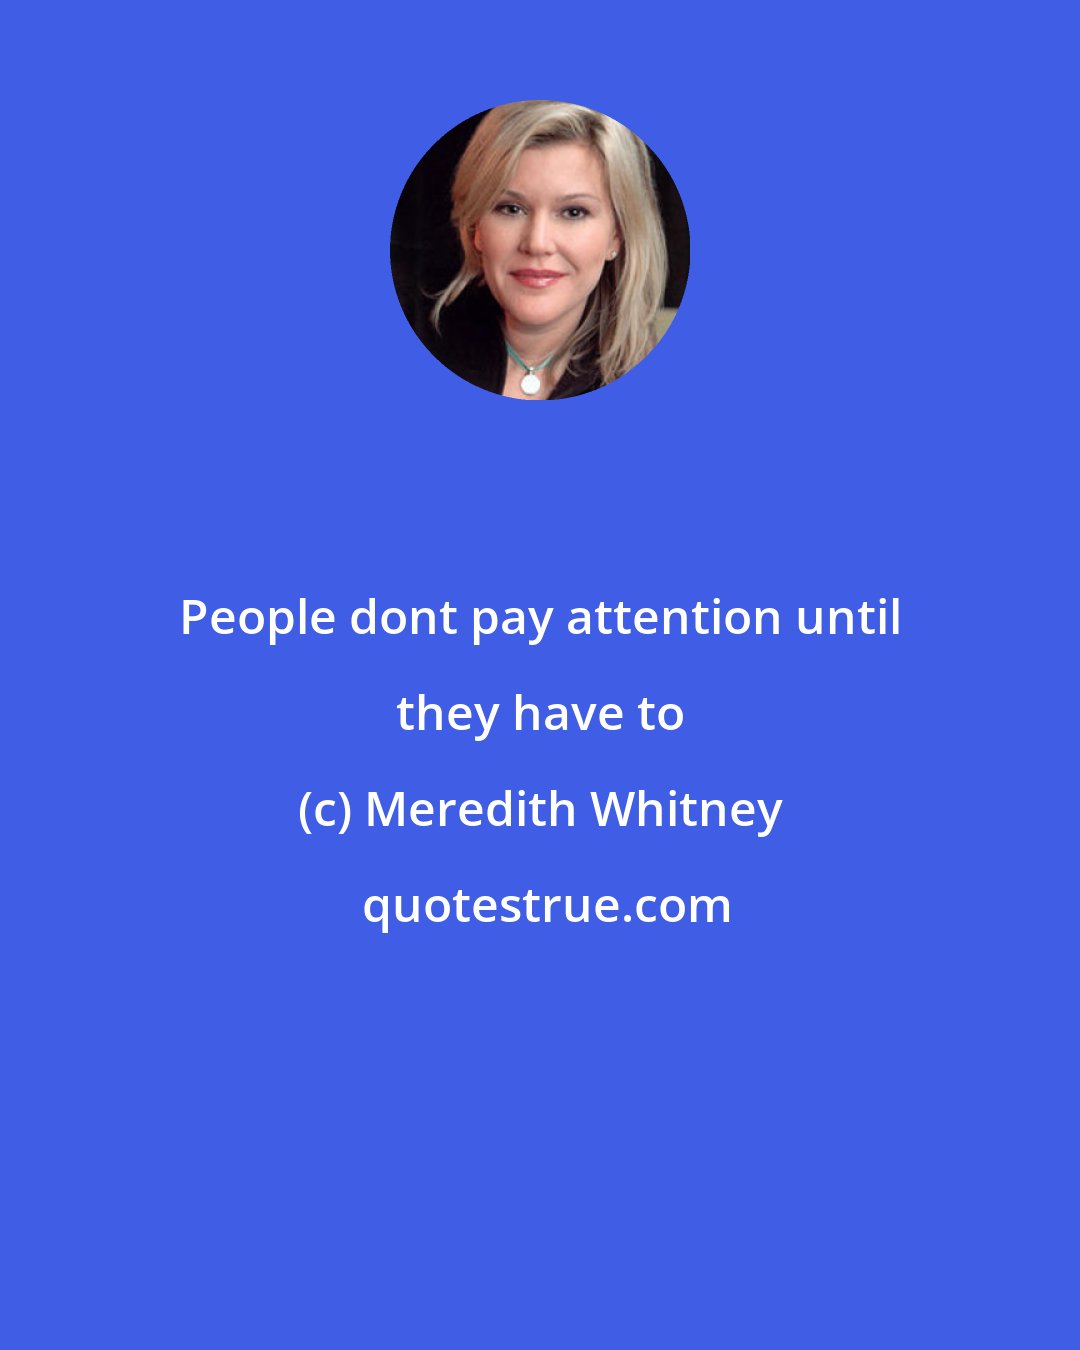 Meredith Whitney: People dont pay attention until they have to